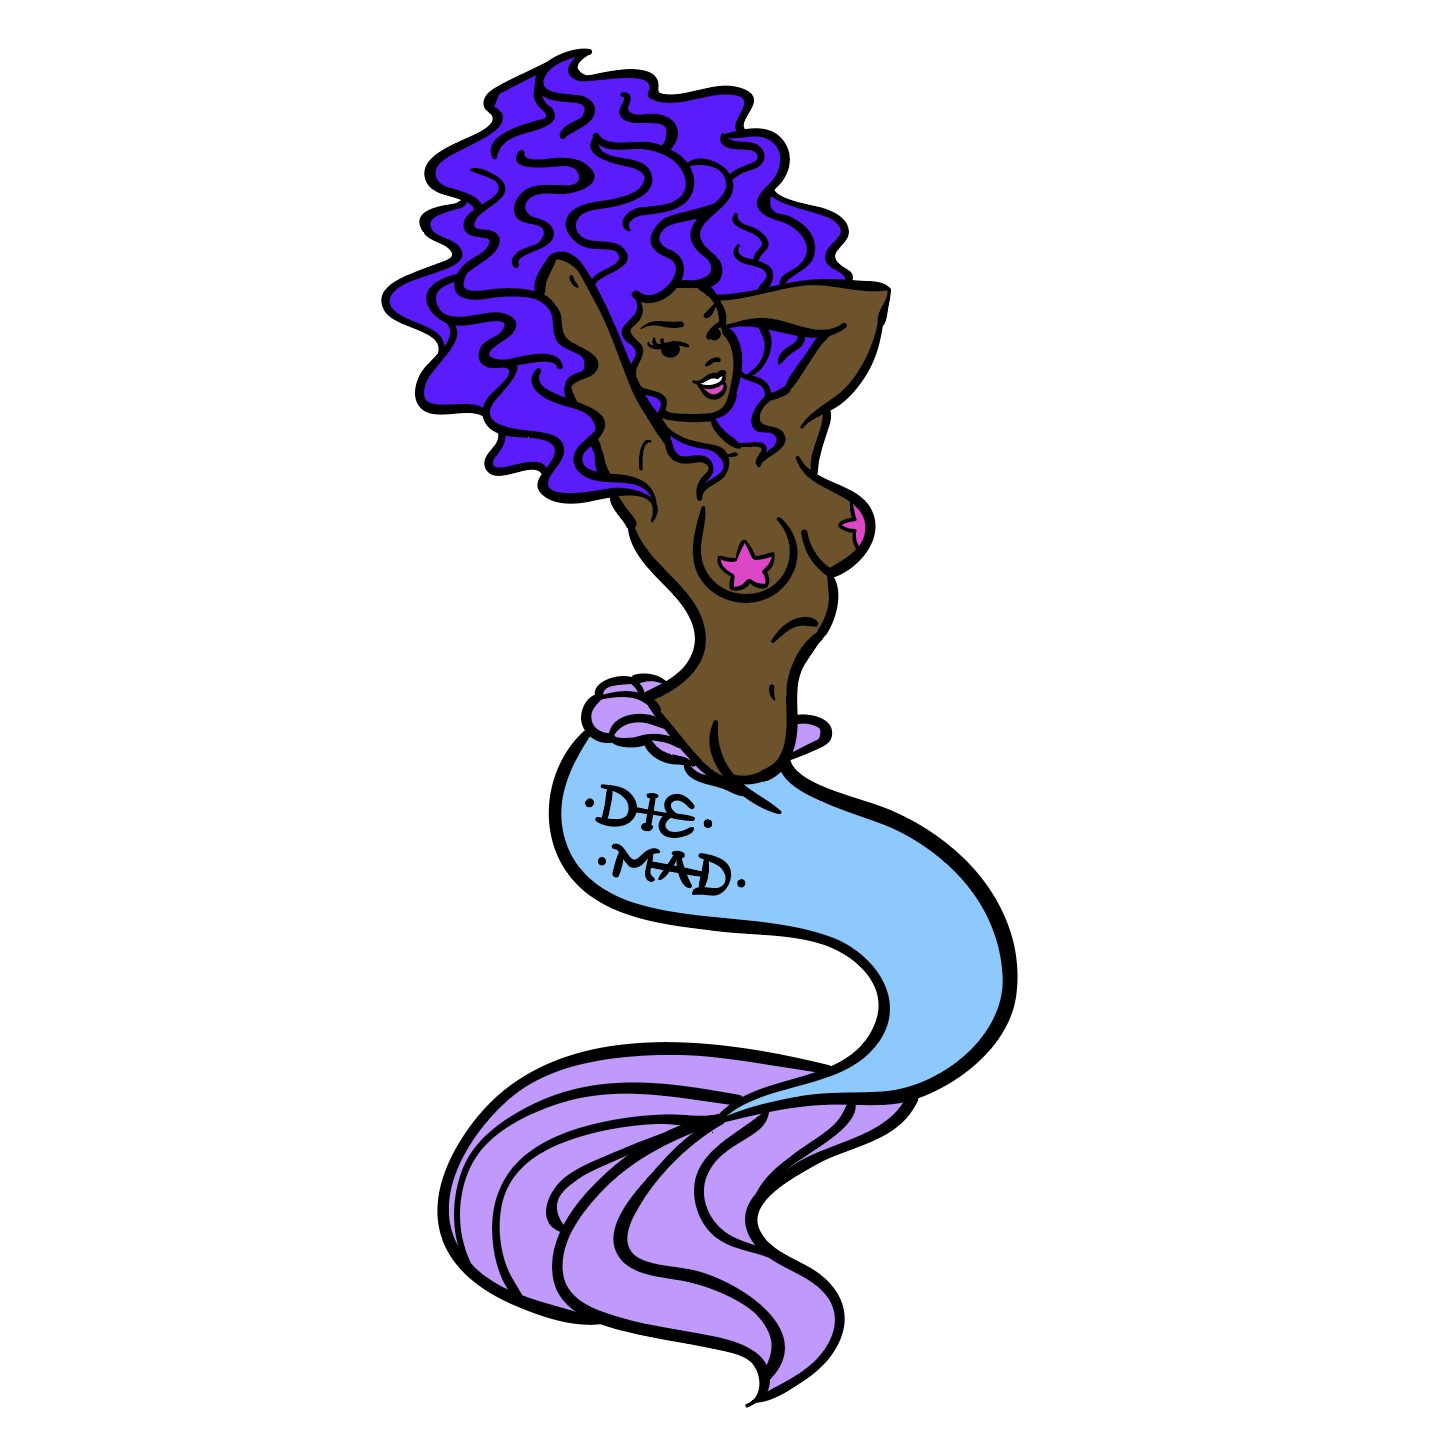 A matte vinyl sticker of a black femme mermaid with purple hair. She has a tattoo on her fish-butt that says "DIE MAD".